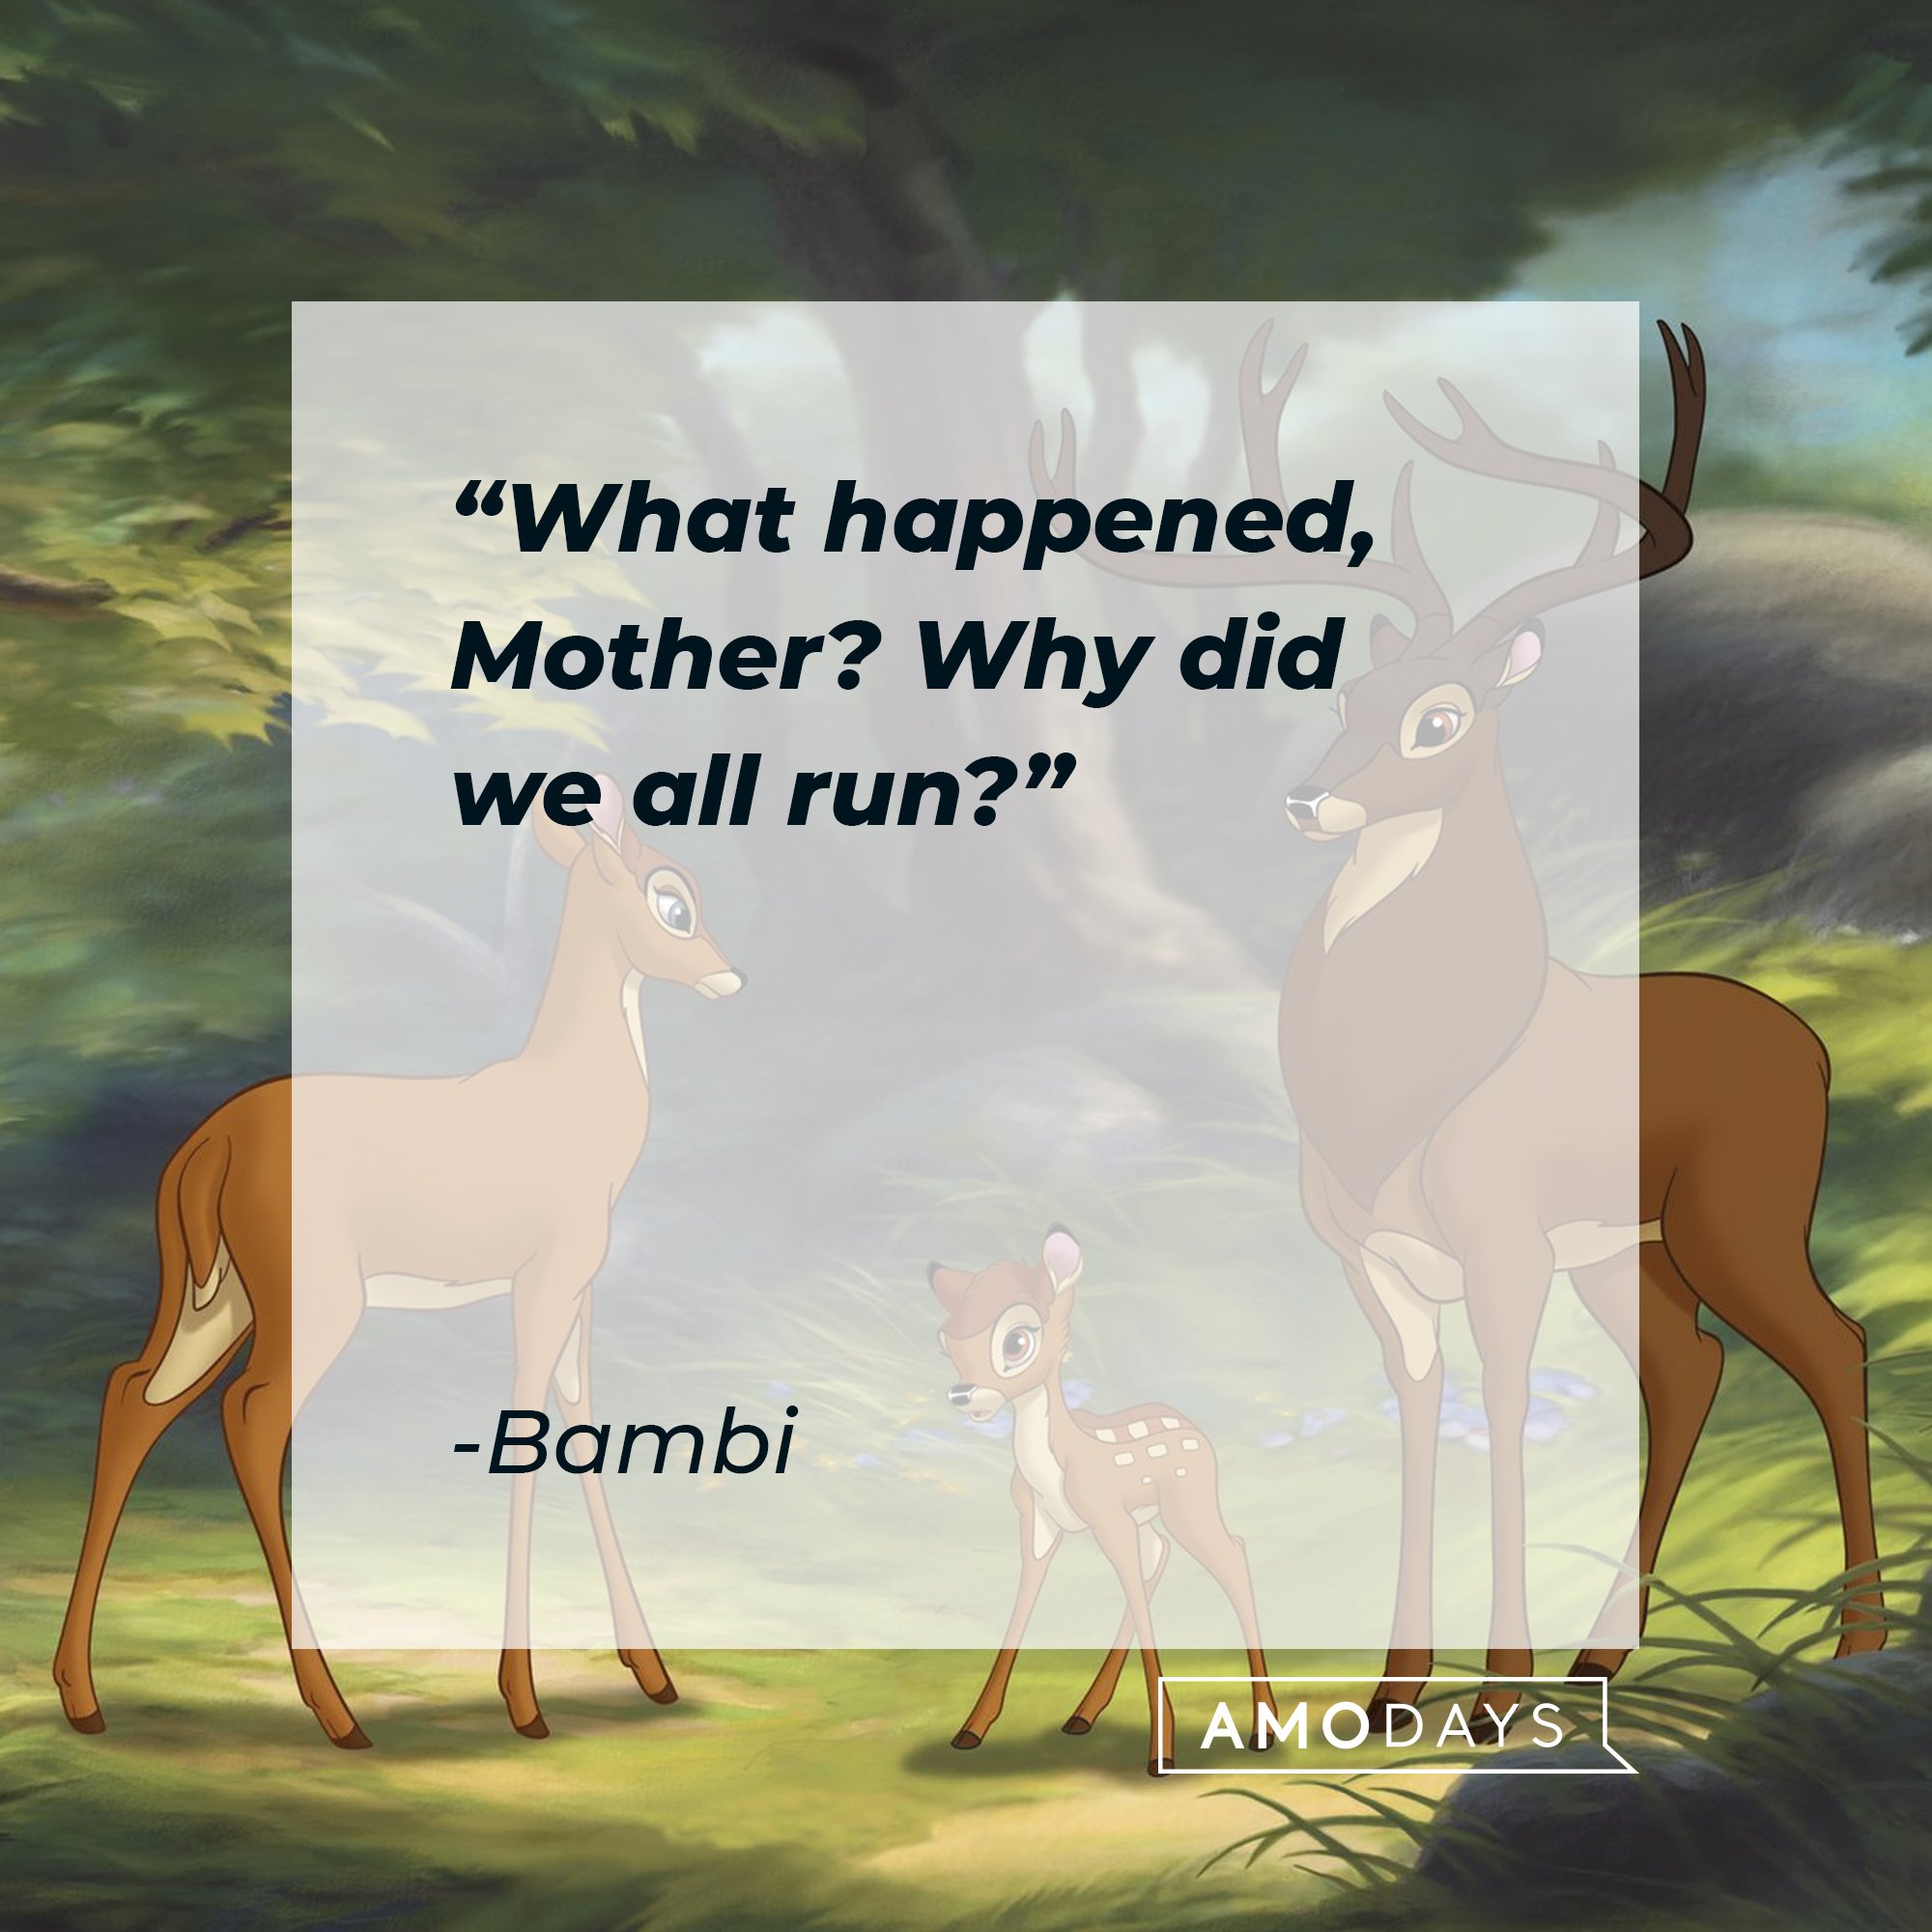 Bambi 's quote "What happened, Mother? Why did we all run?" | Source: facebook.com/DisneyBambi